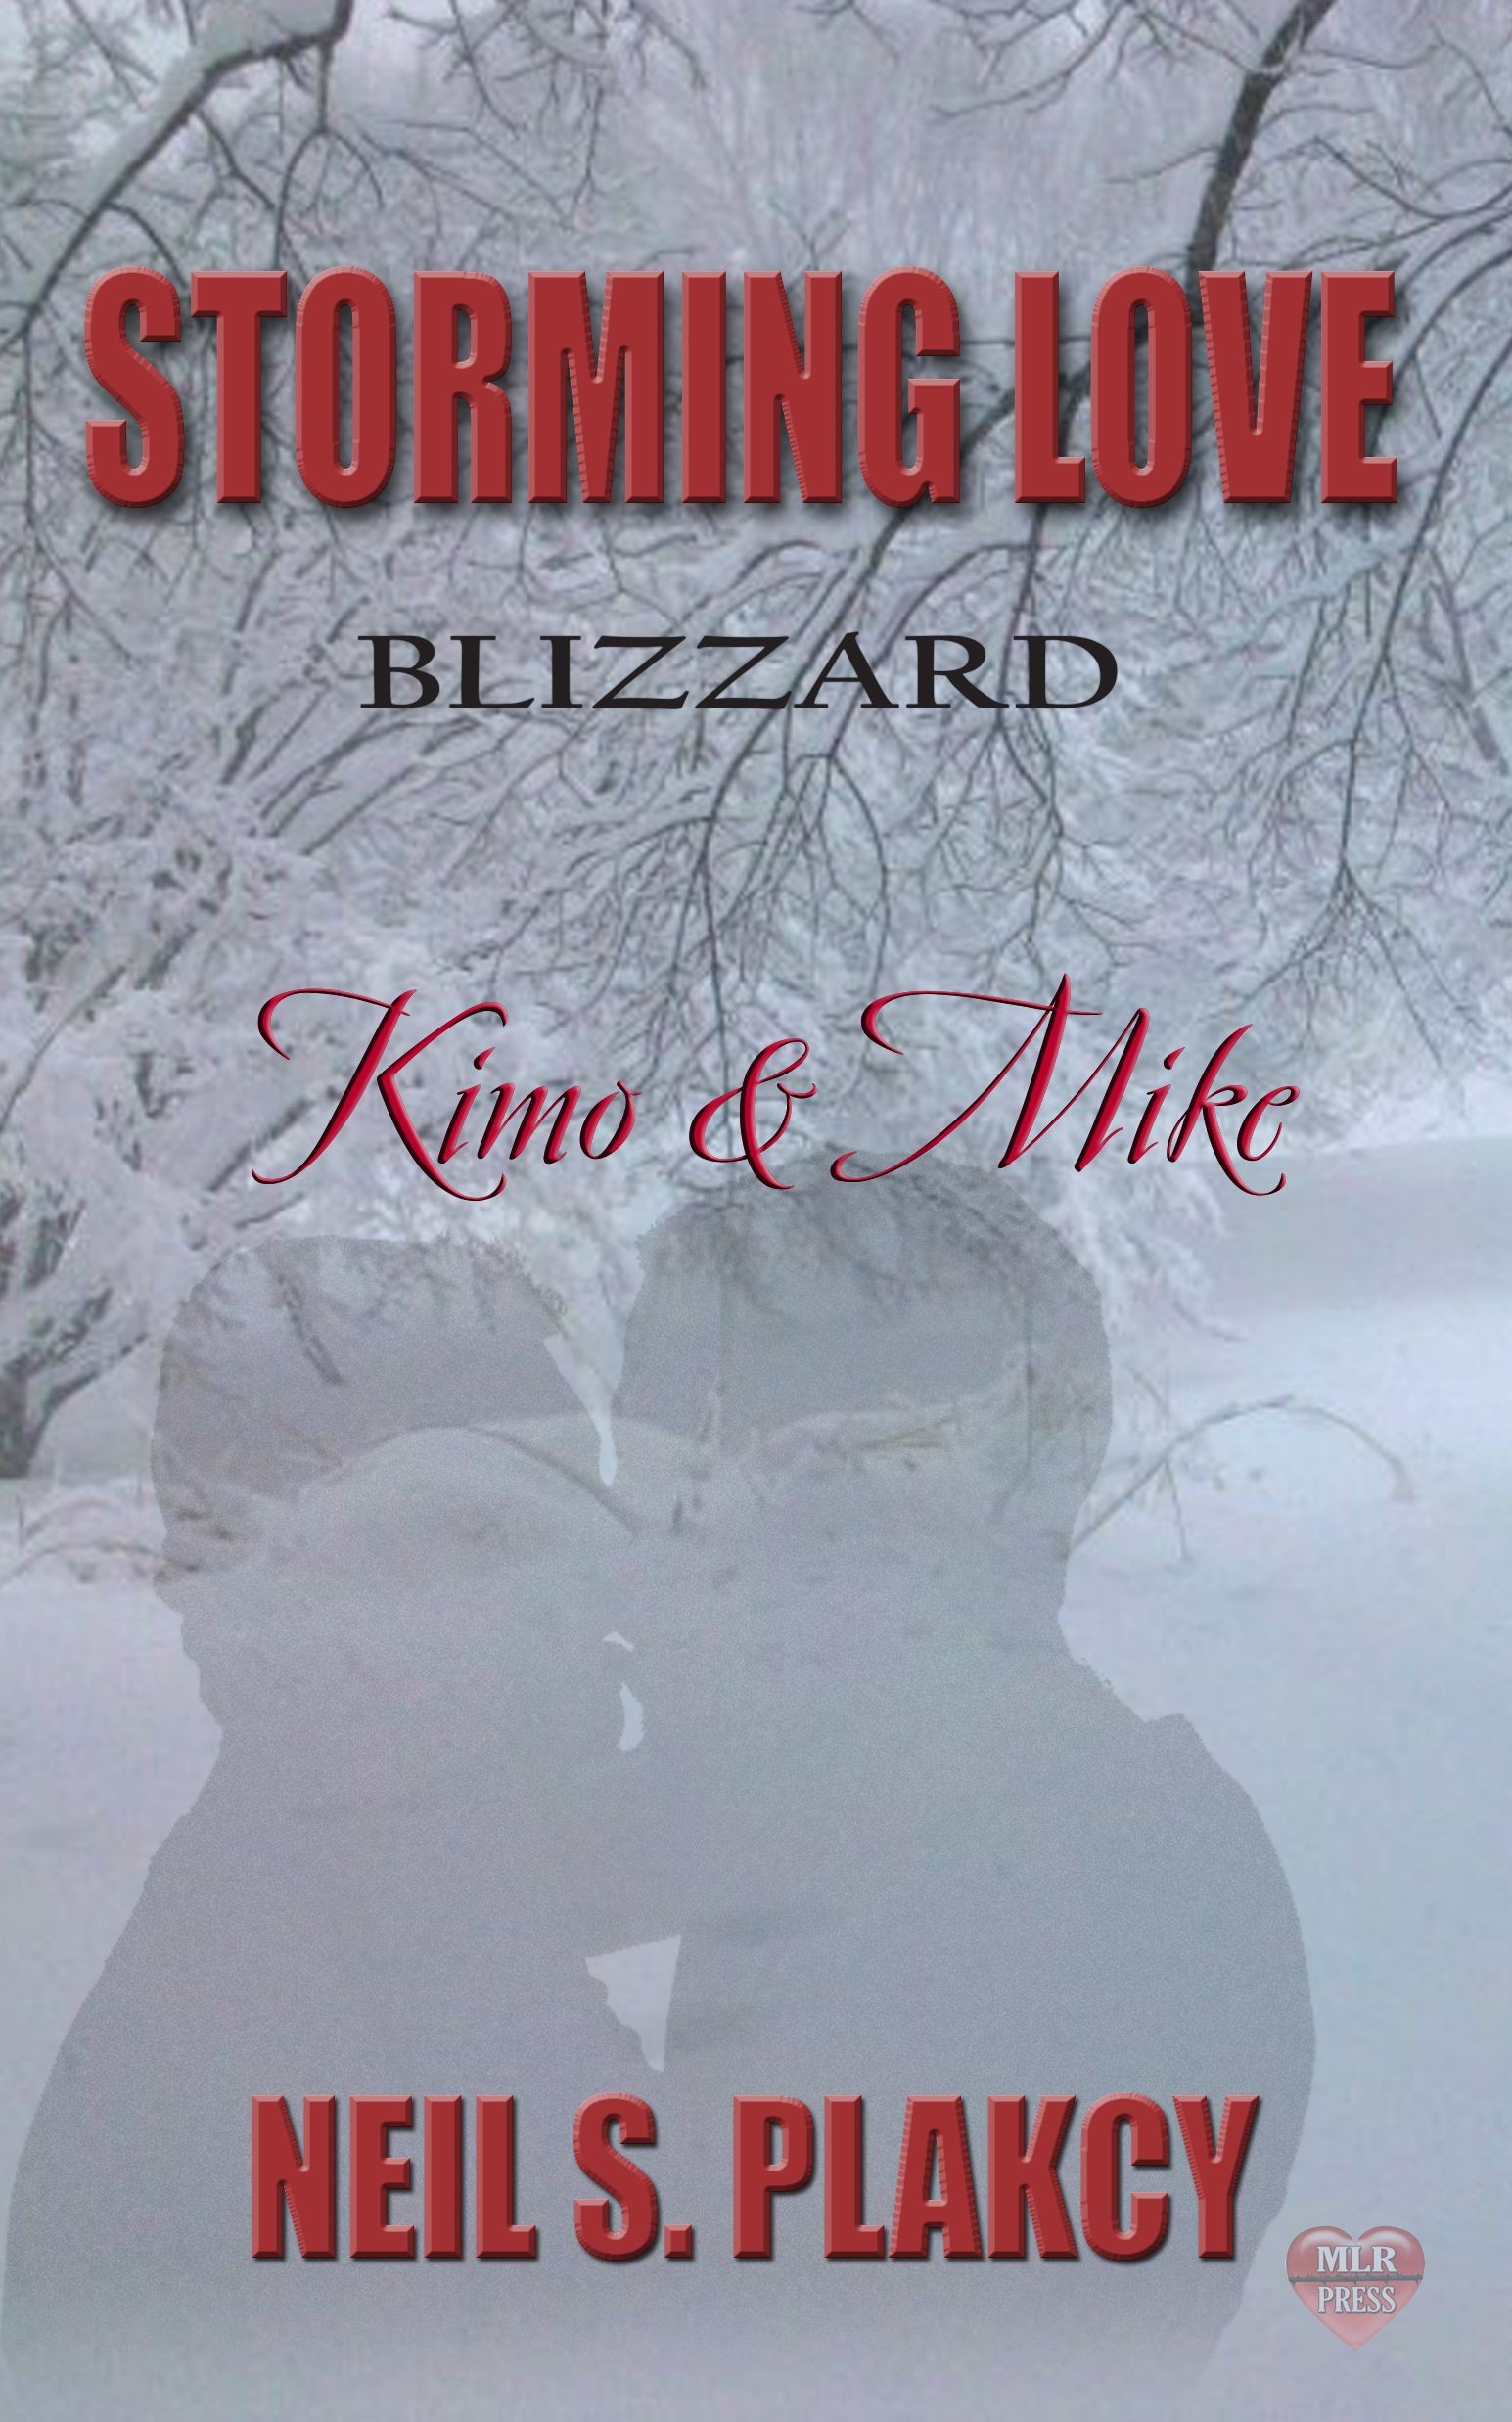 Storming Love Blizzard Kimo & Mike (2015)